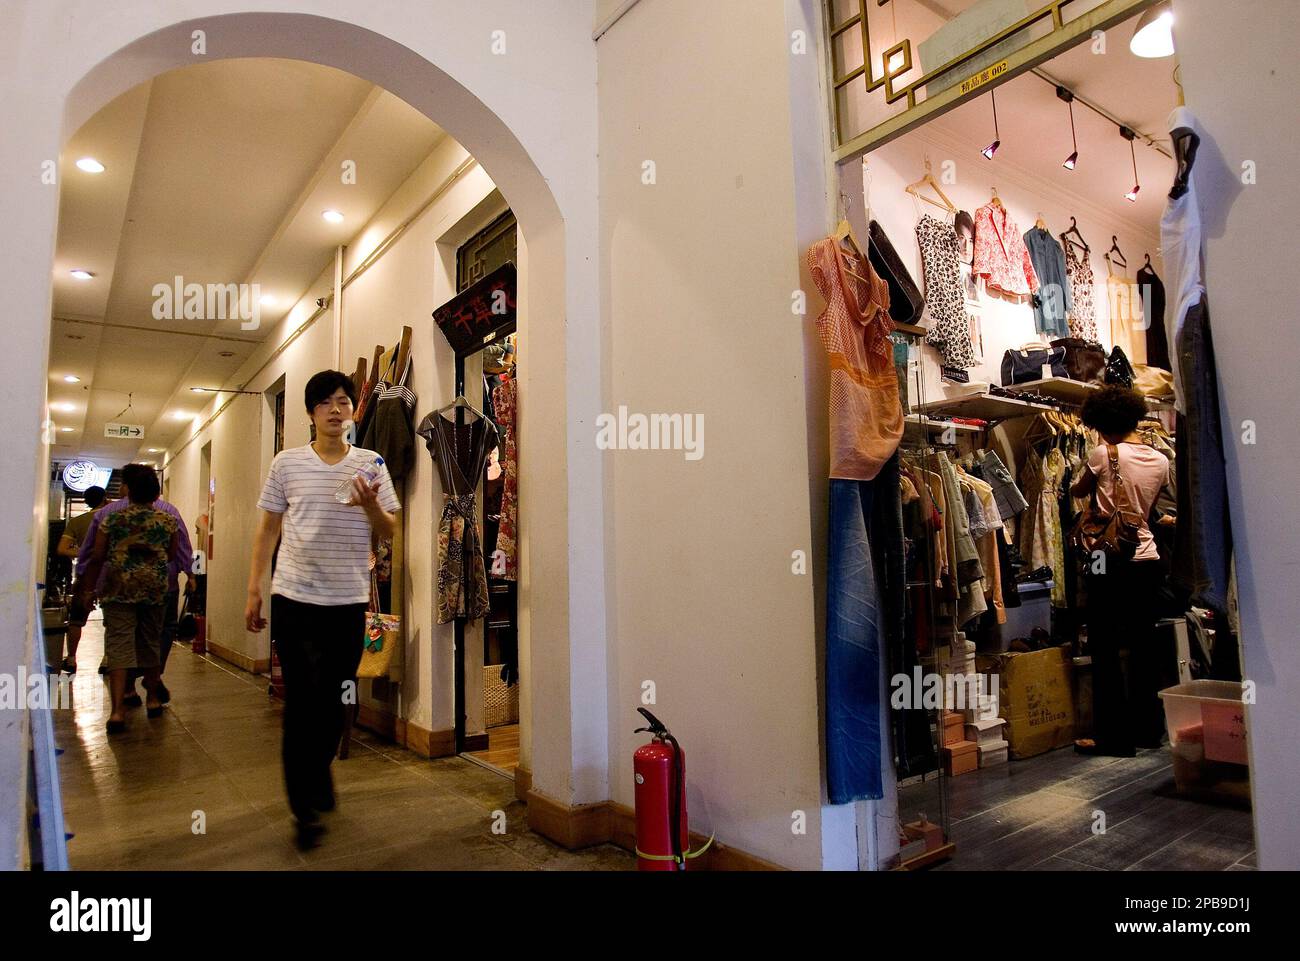 Visitors shop the fashion boutique inside the Nali Mall in Beijing, China,  Friday, July 27, 2007. If you tire of Olympic fever and can't stomach sites  jammed with flag waving throngs of